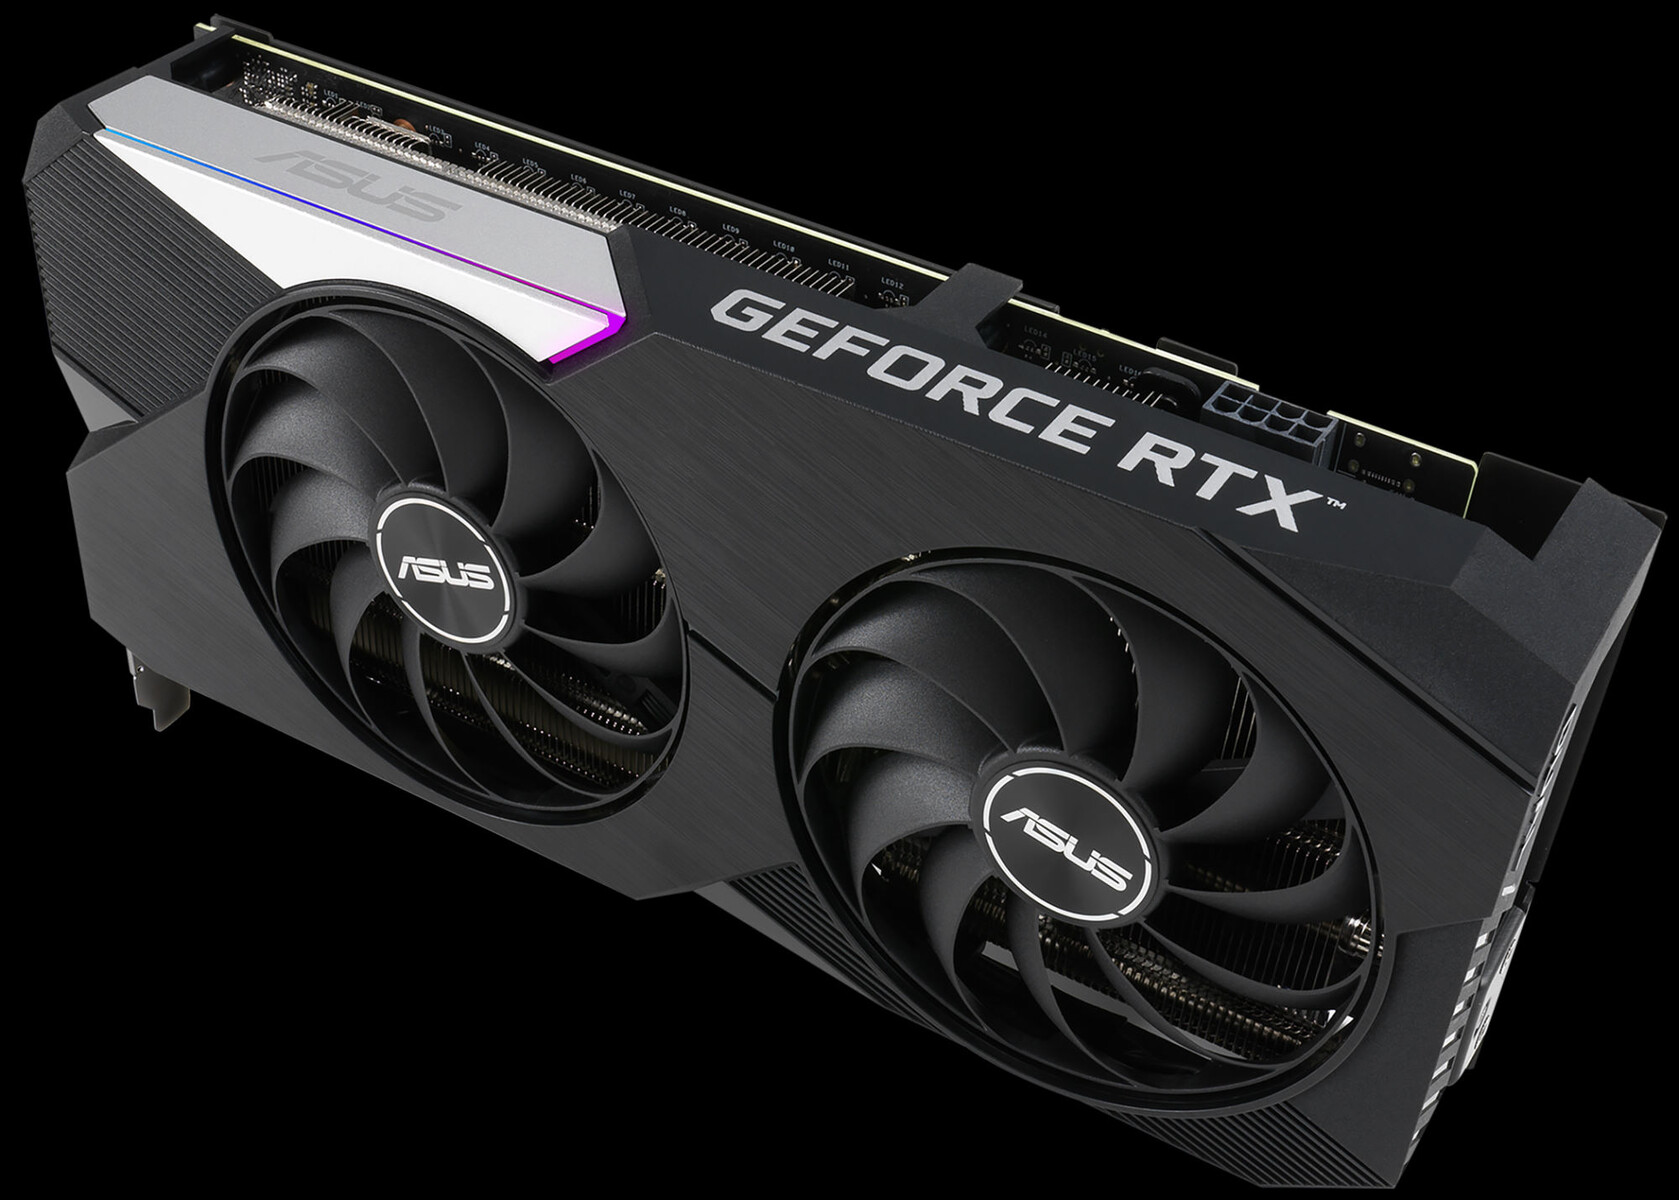 Asus unveils multiple GeForce RTX 3060 Ti graphics cards 